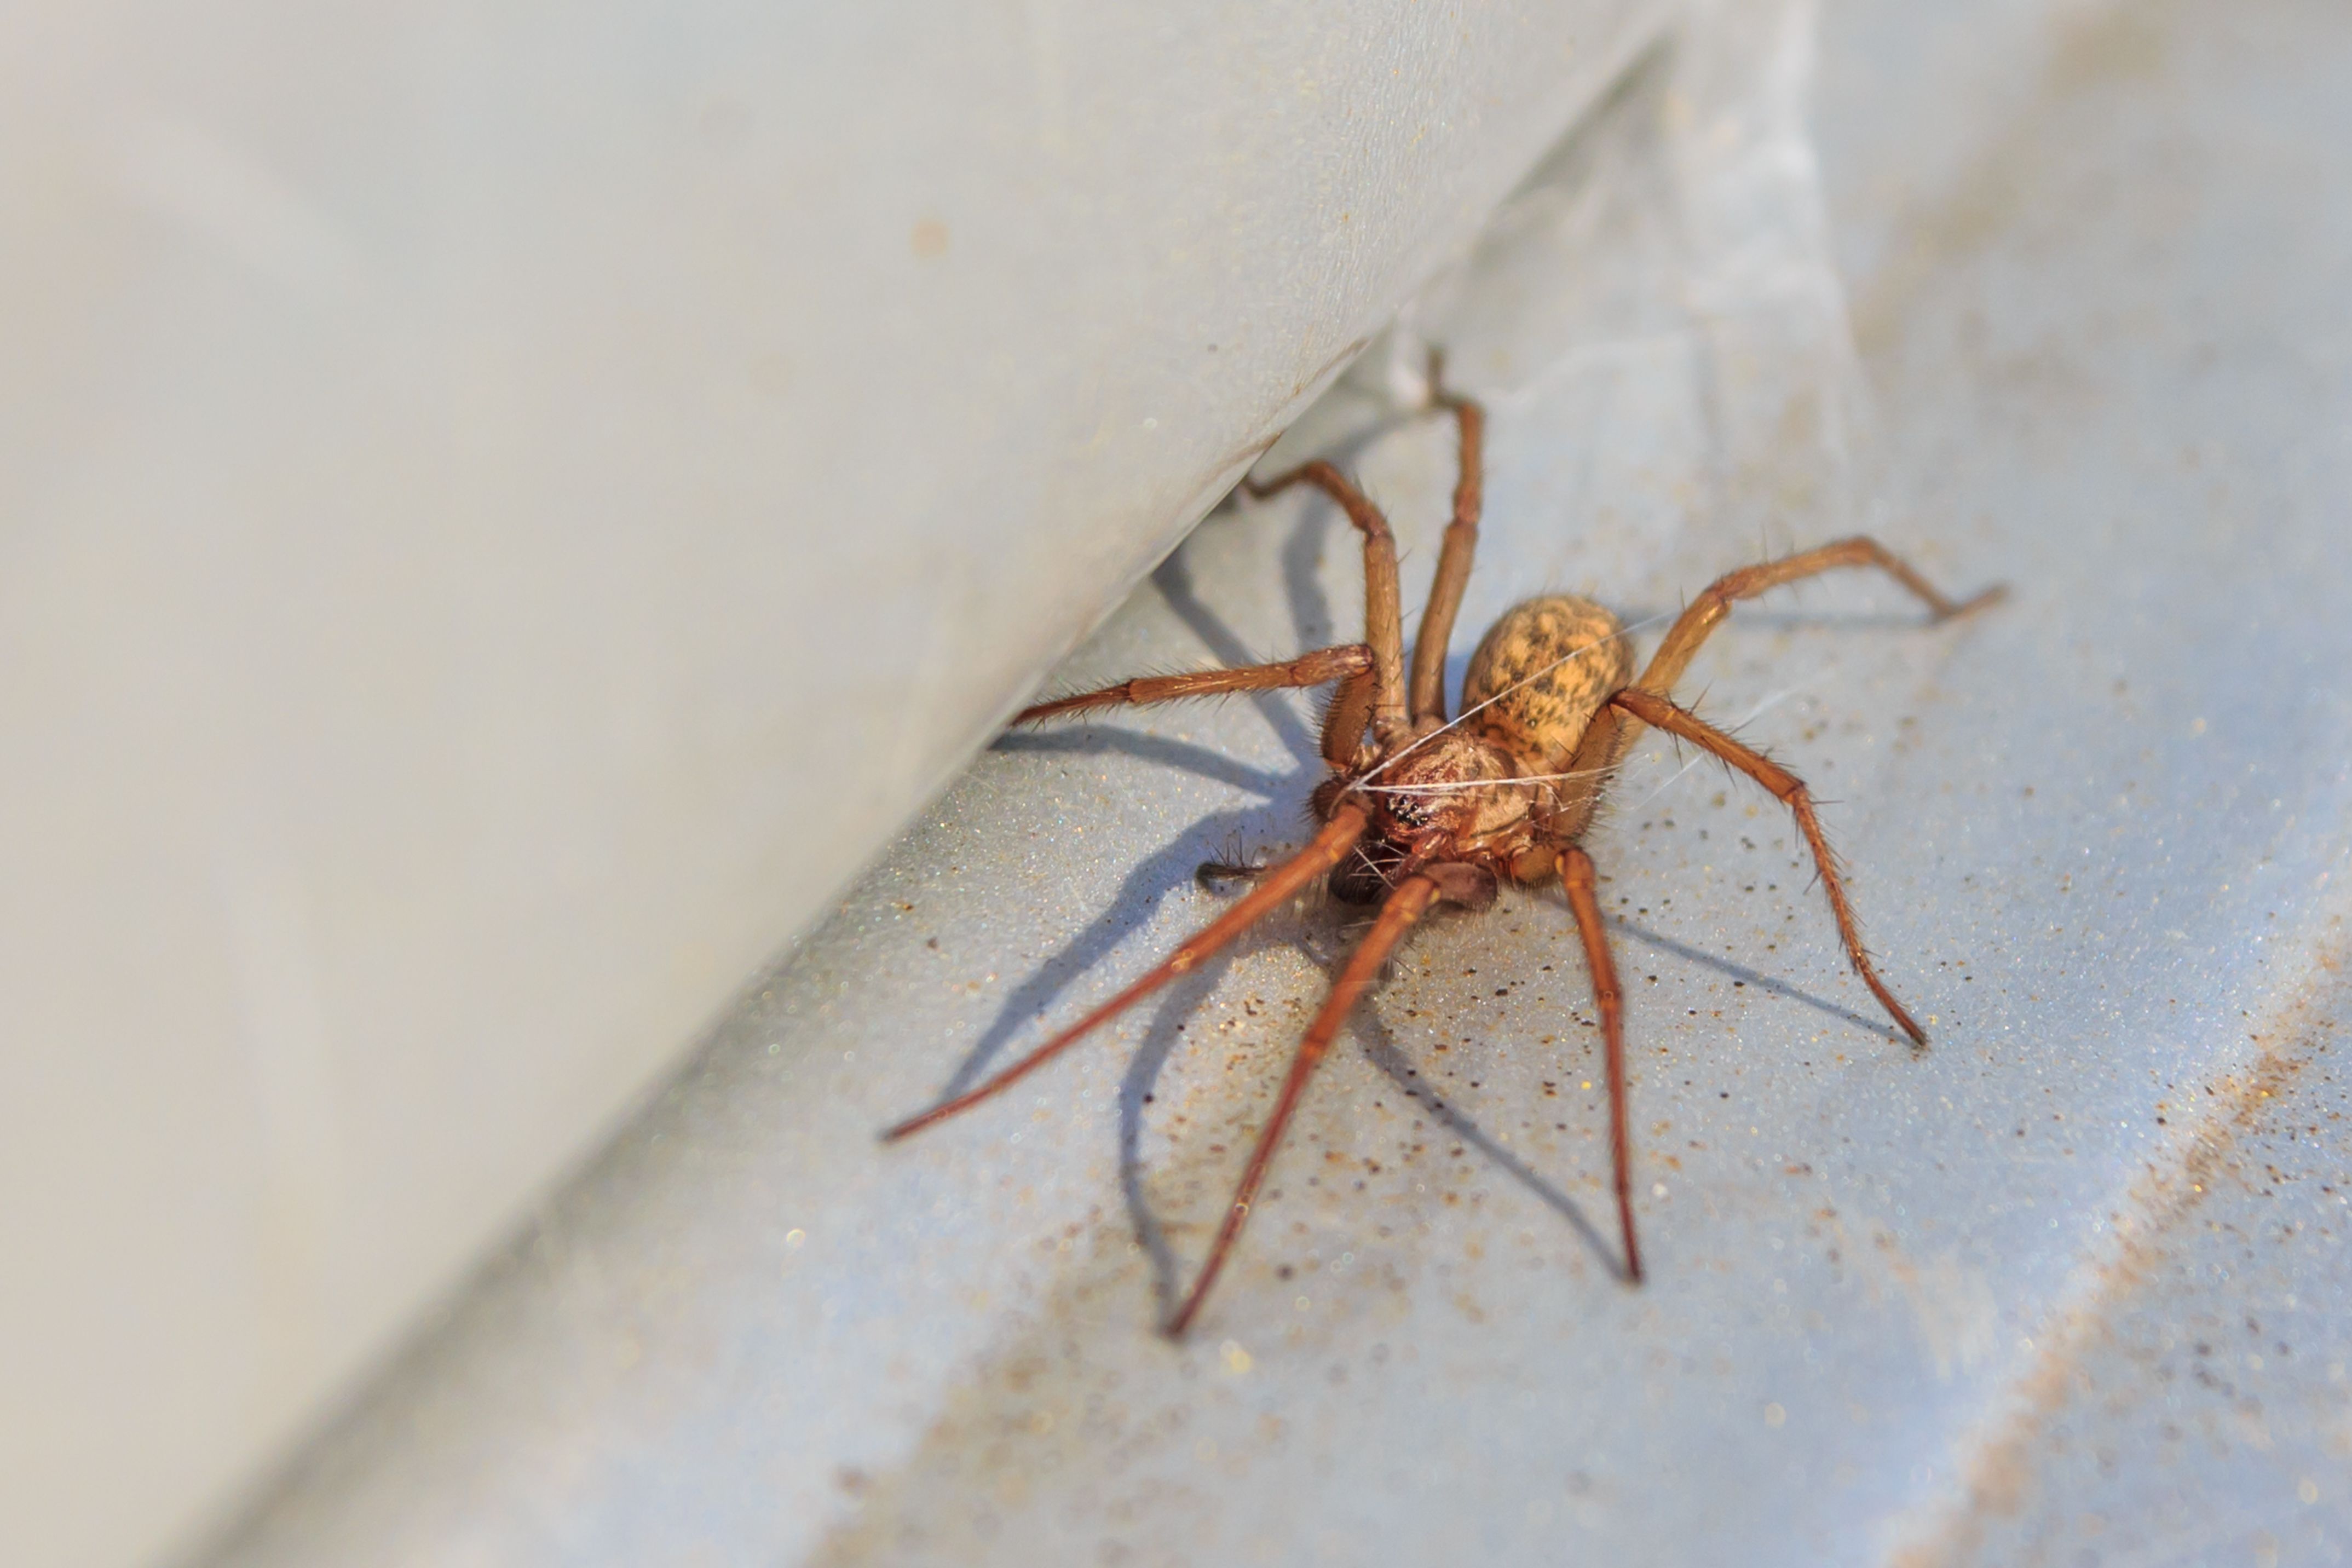 What You Need to Know About House Spiders